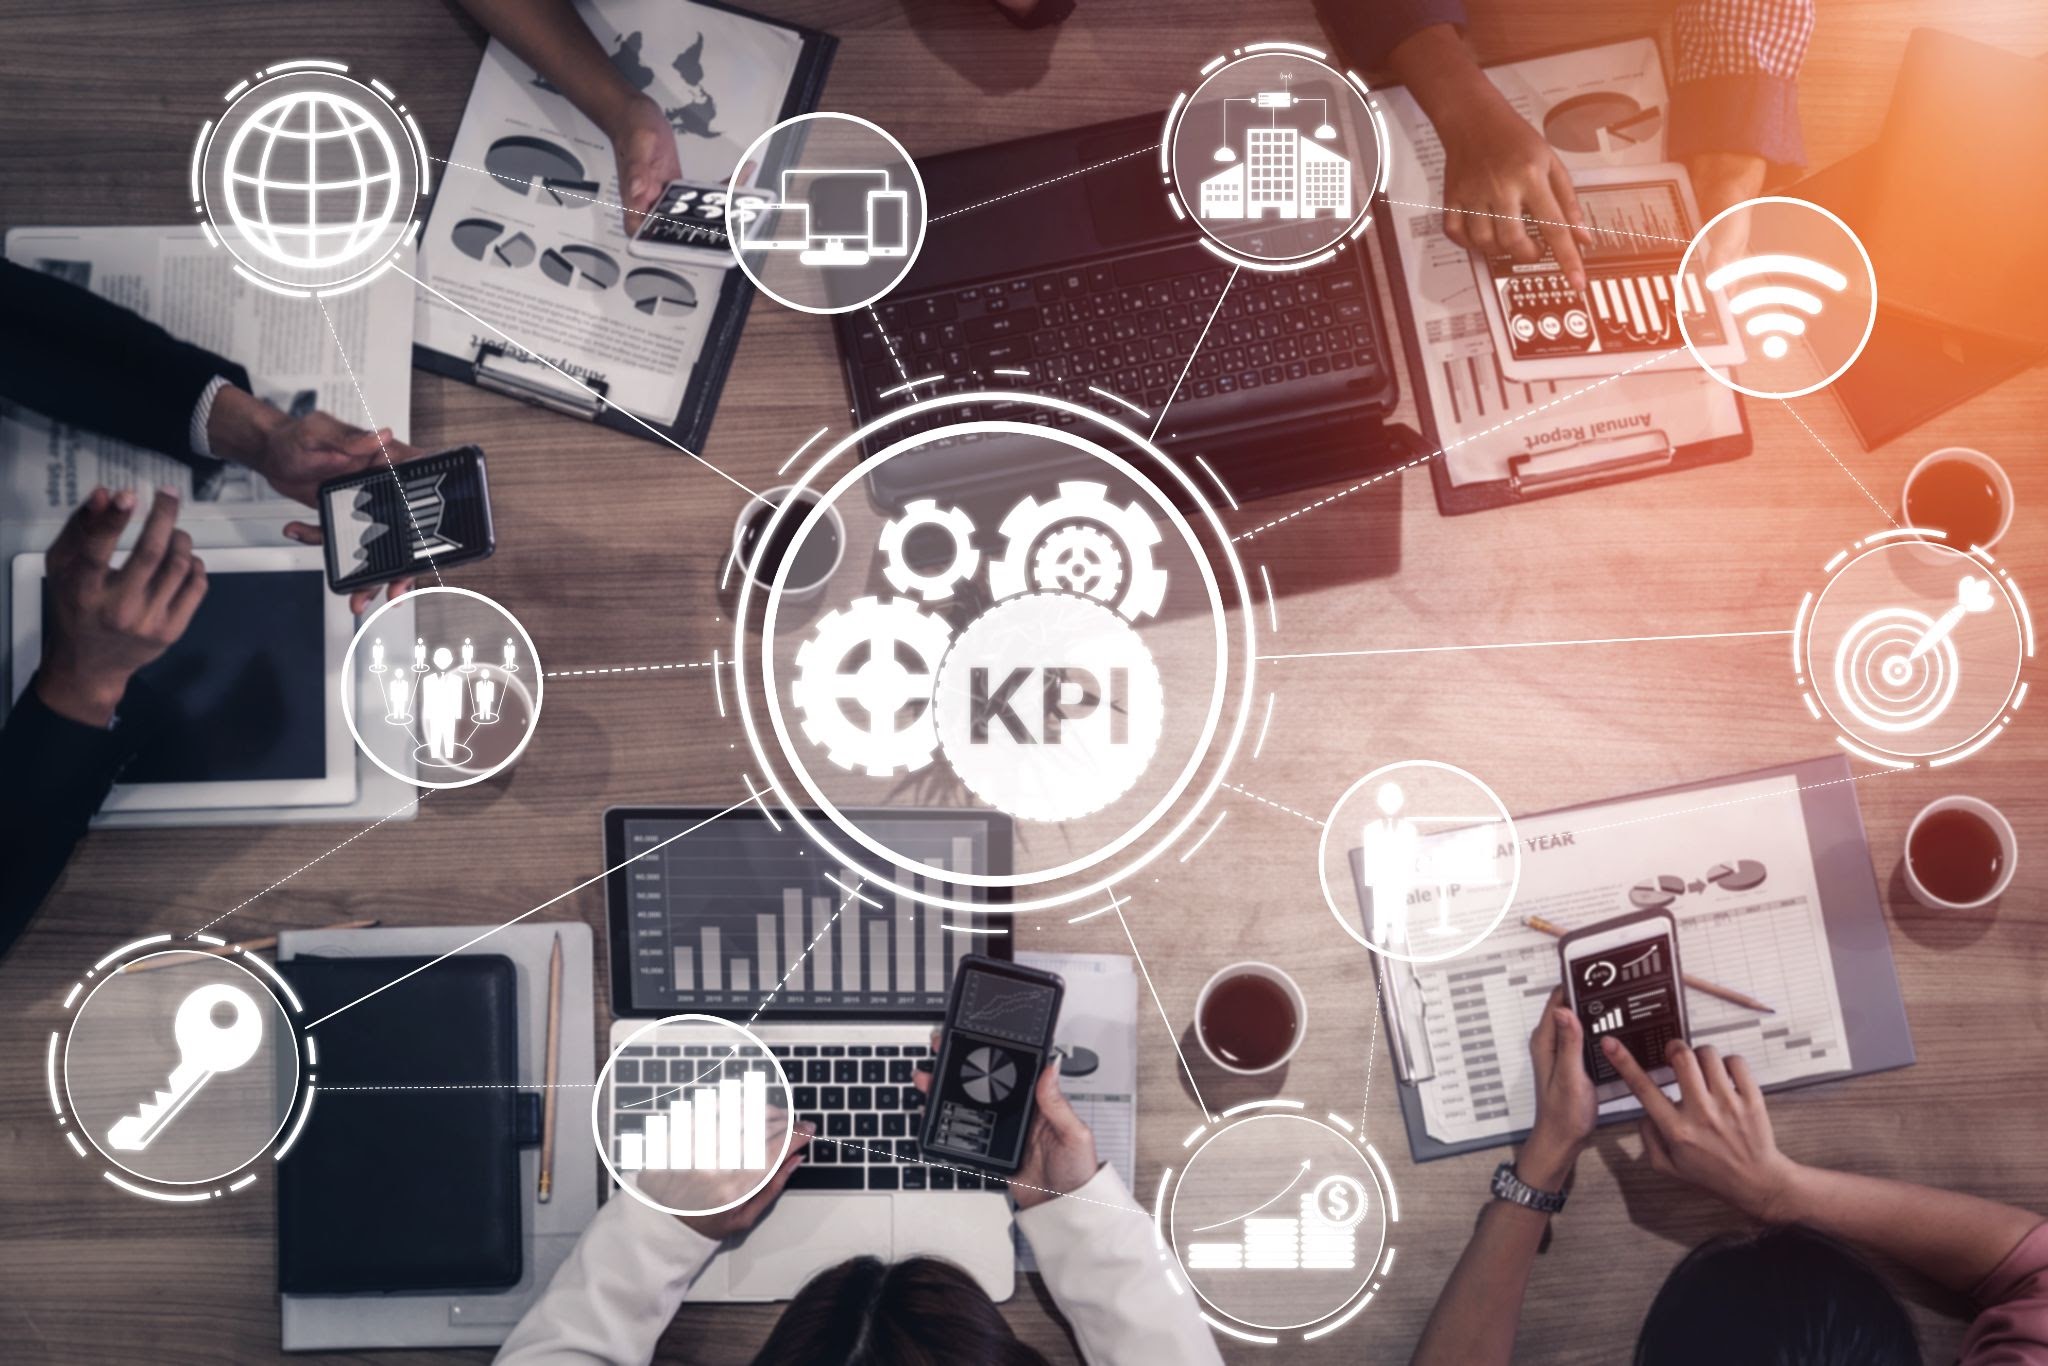 Defining sales metrics or KPIs is the first step in a data-driven sales approach